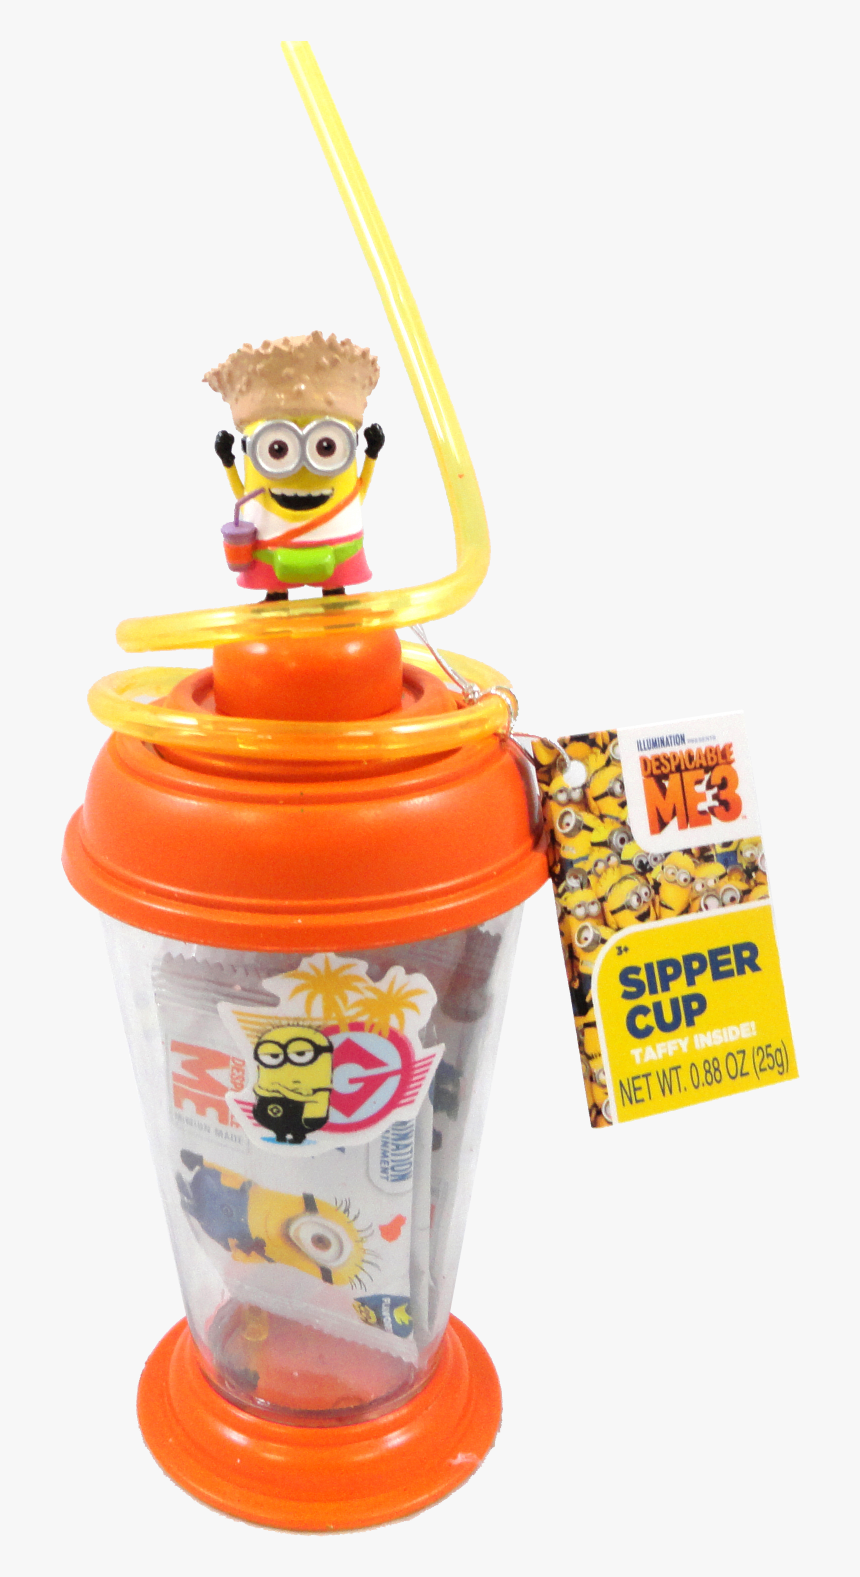 Minions Despicable Me 3 Sipper Cup - Candyrific Minions, HD Png Download, Free Download